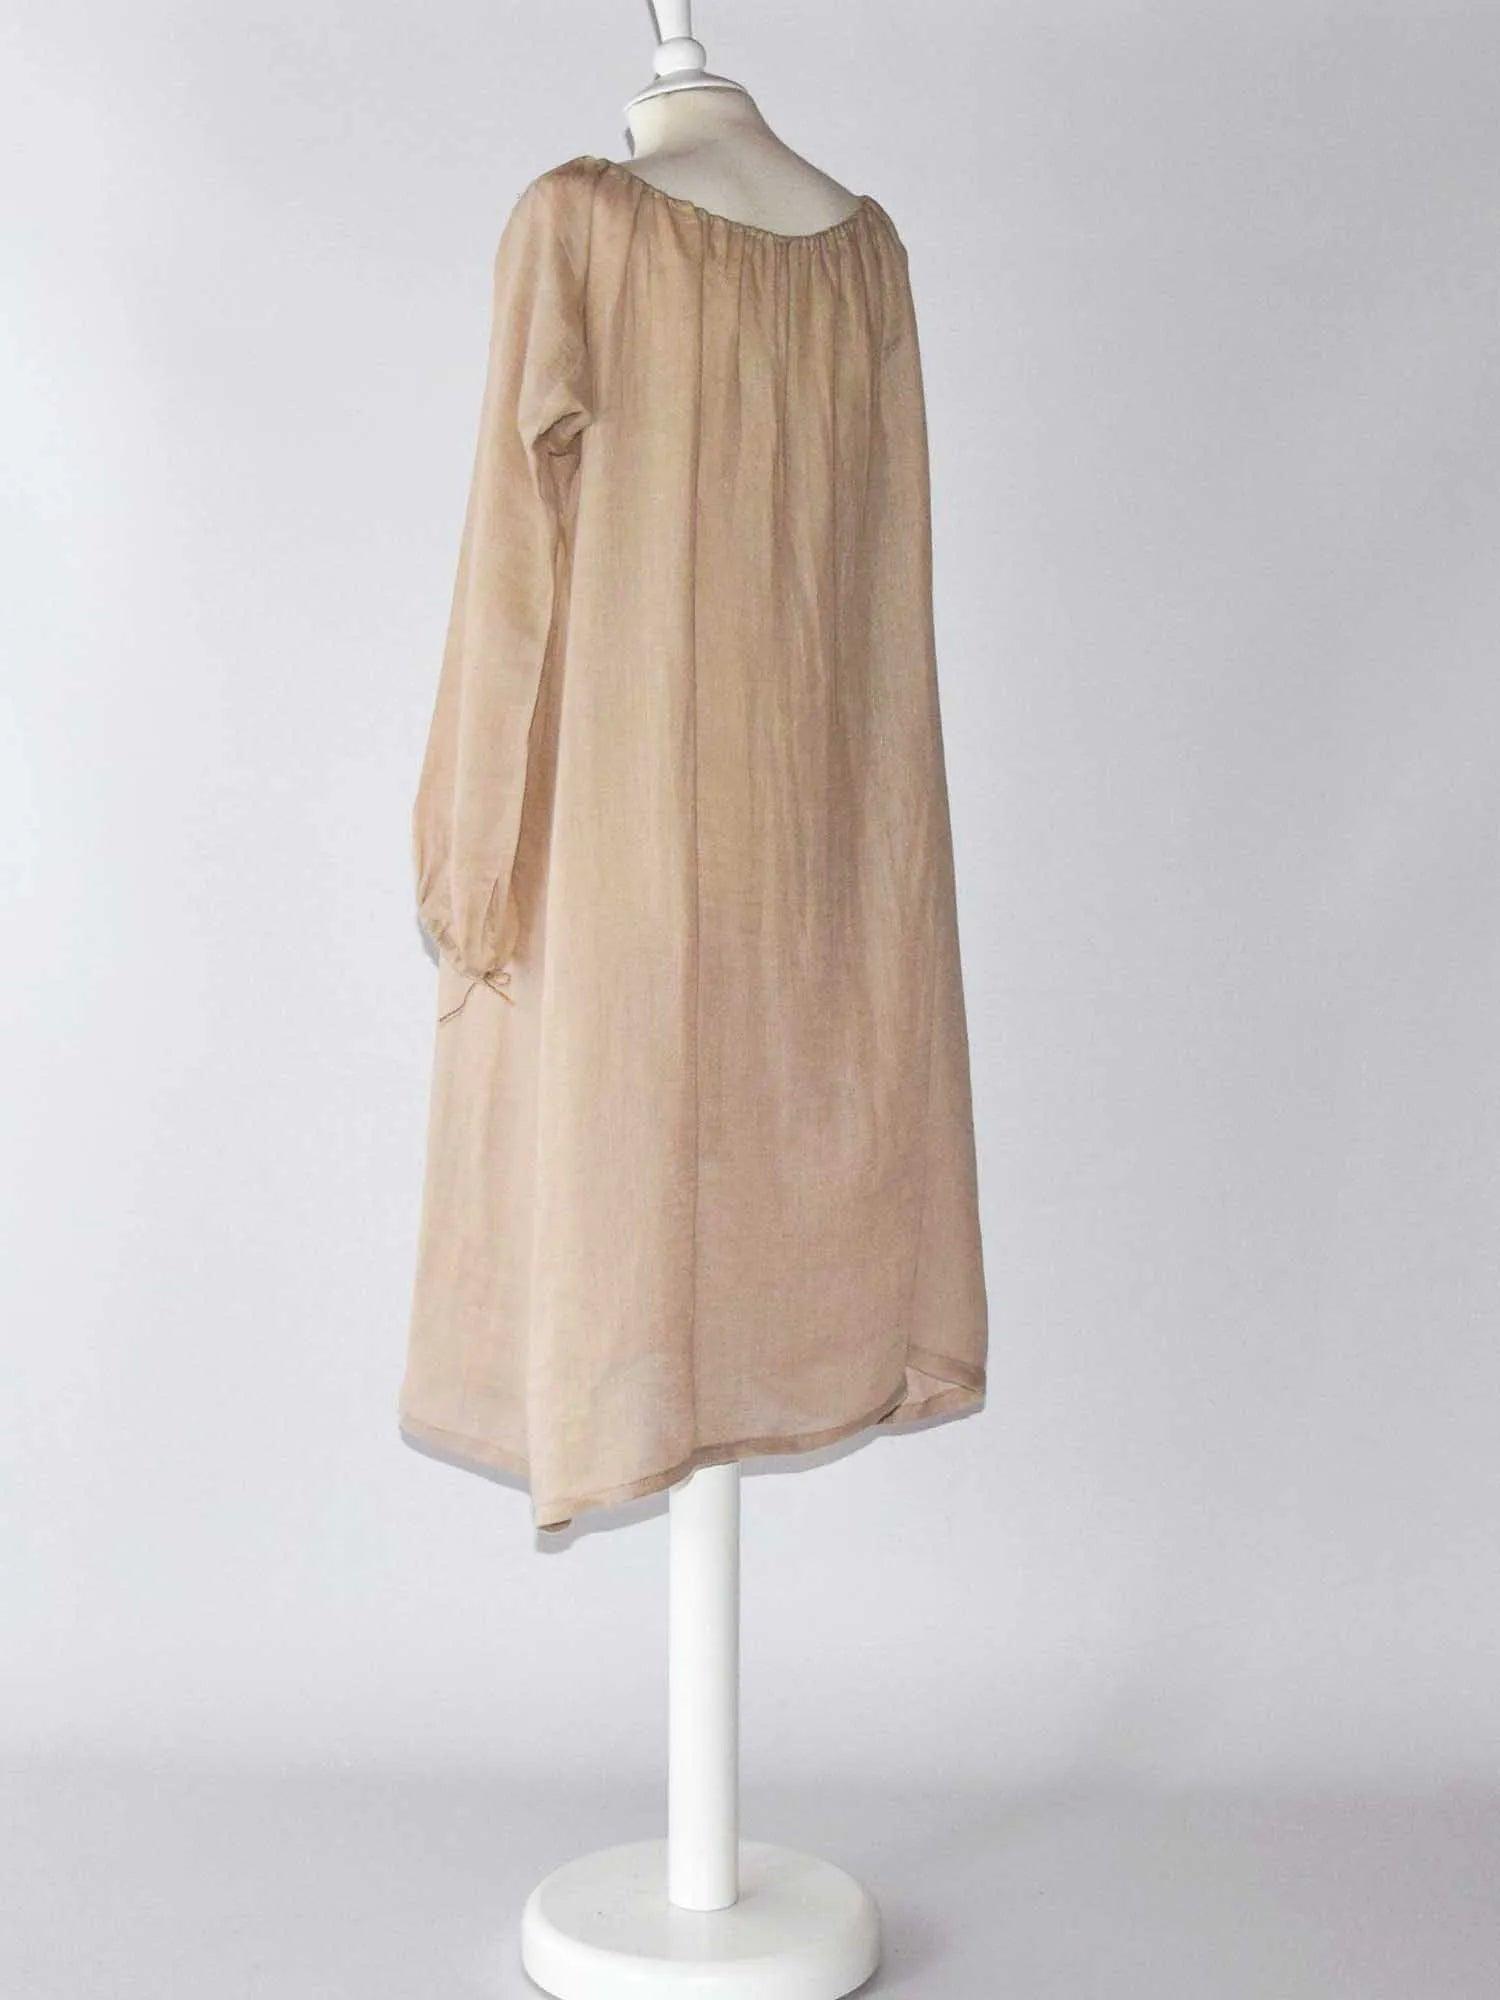 Medieval Inspired Chemise/underdress -  Canada